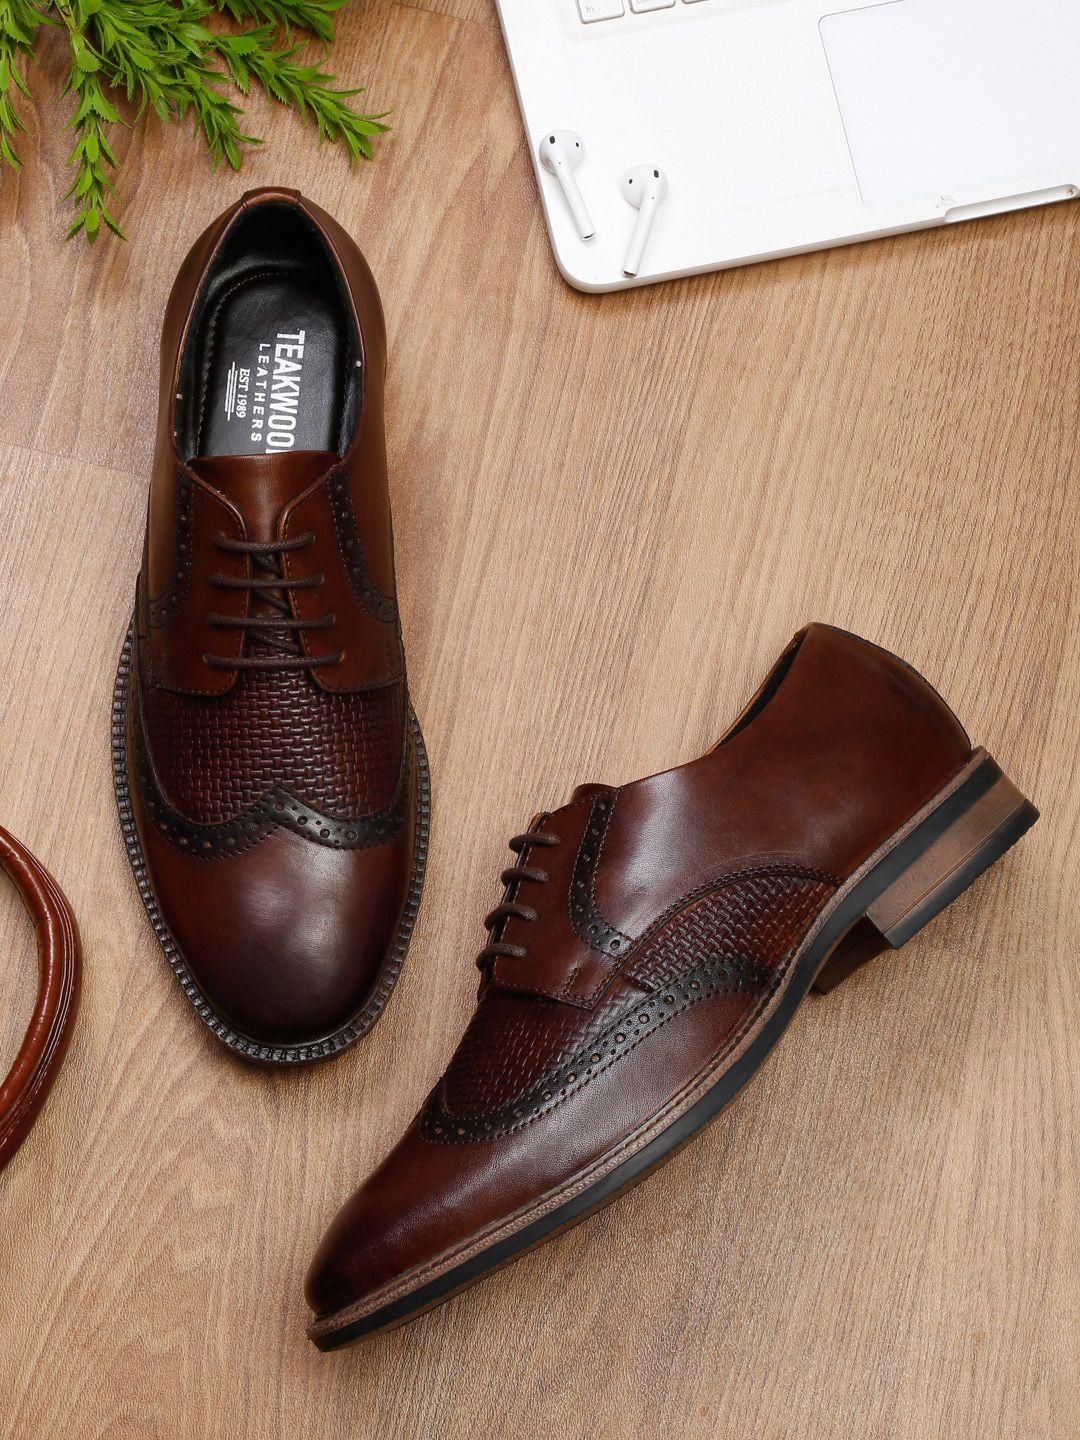 teakwood leathers men textured leather formal shoes